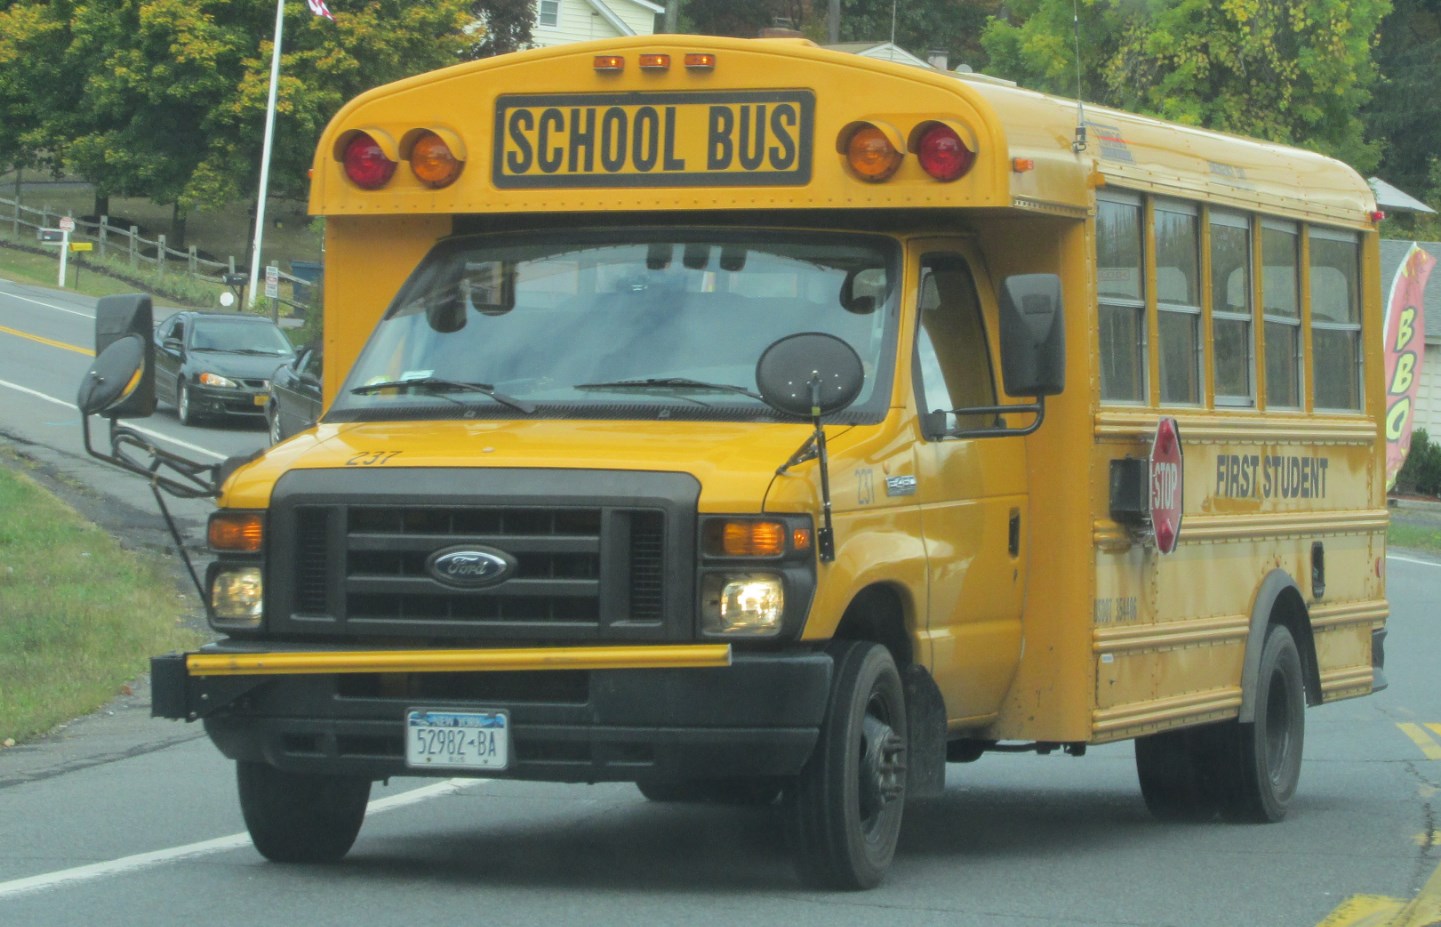 a school bus riding on the street in the day